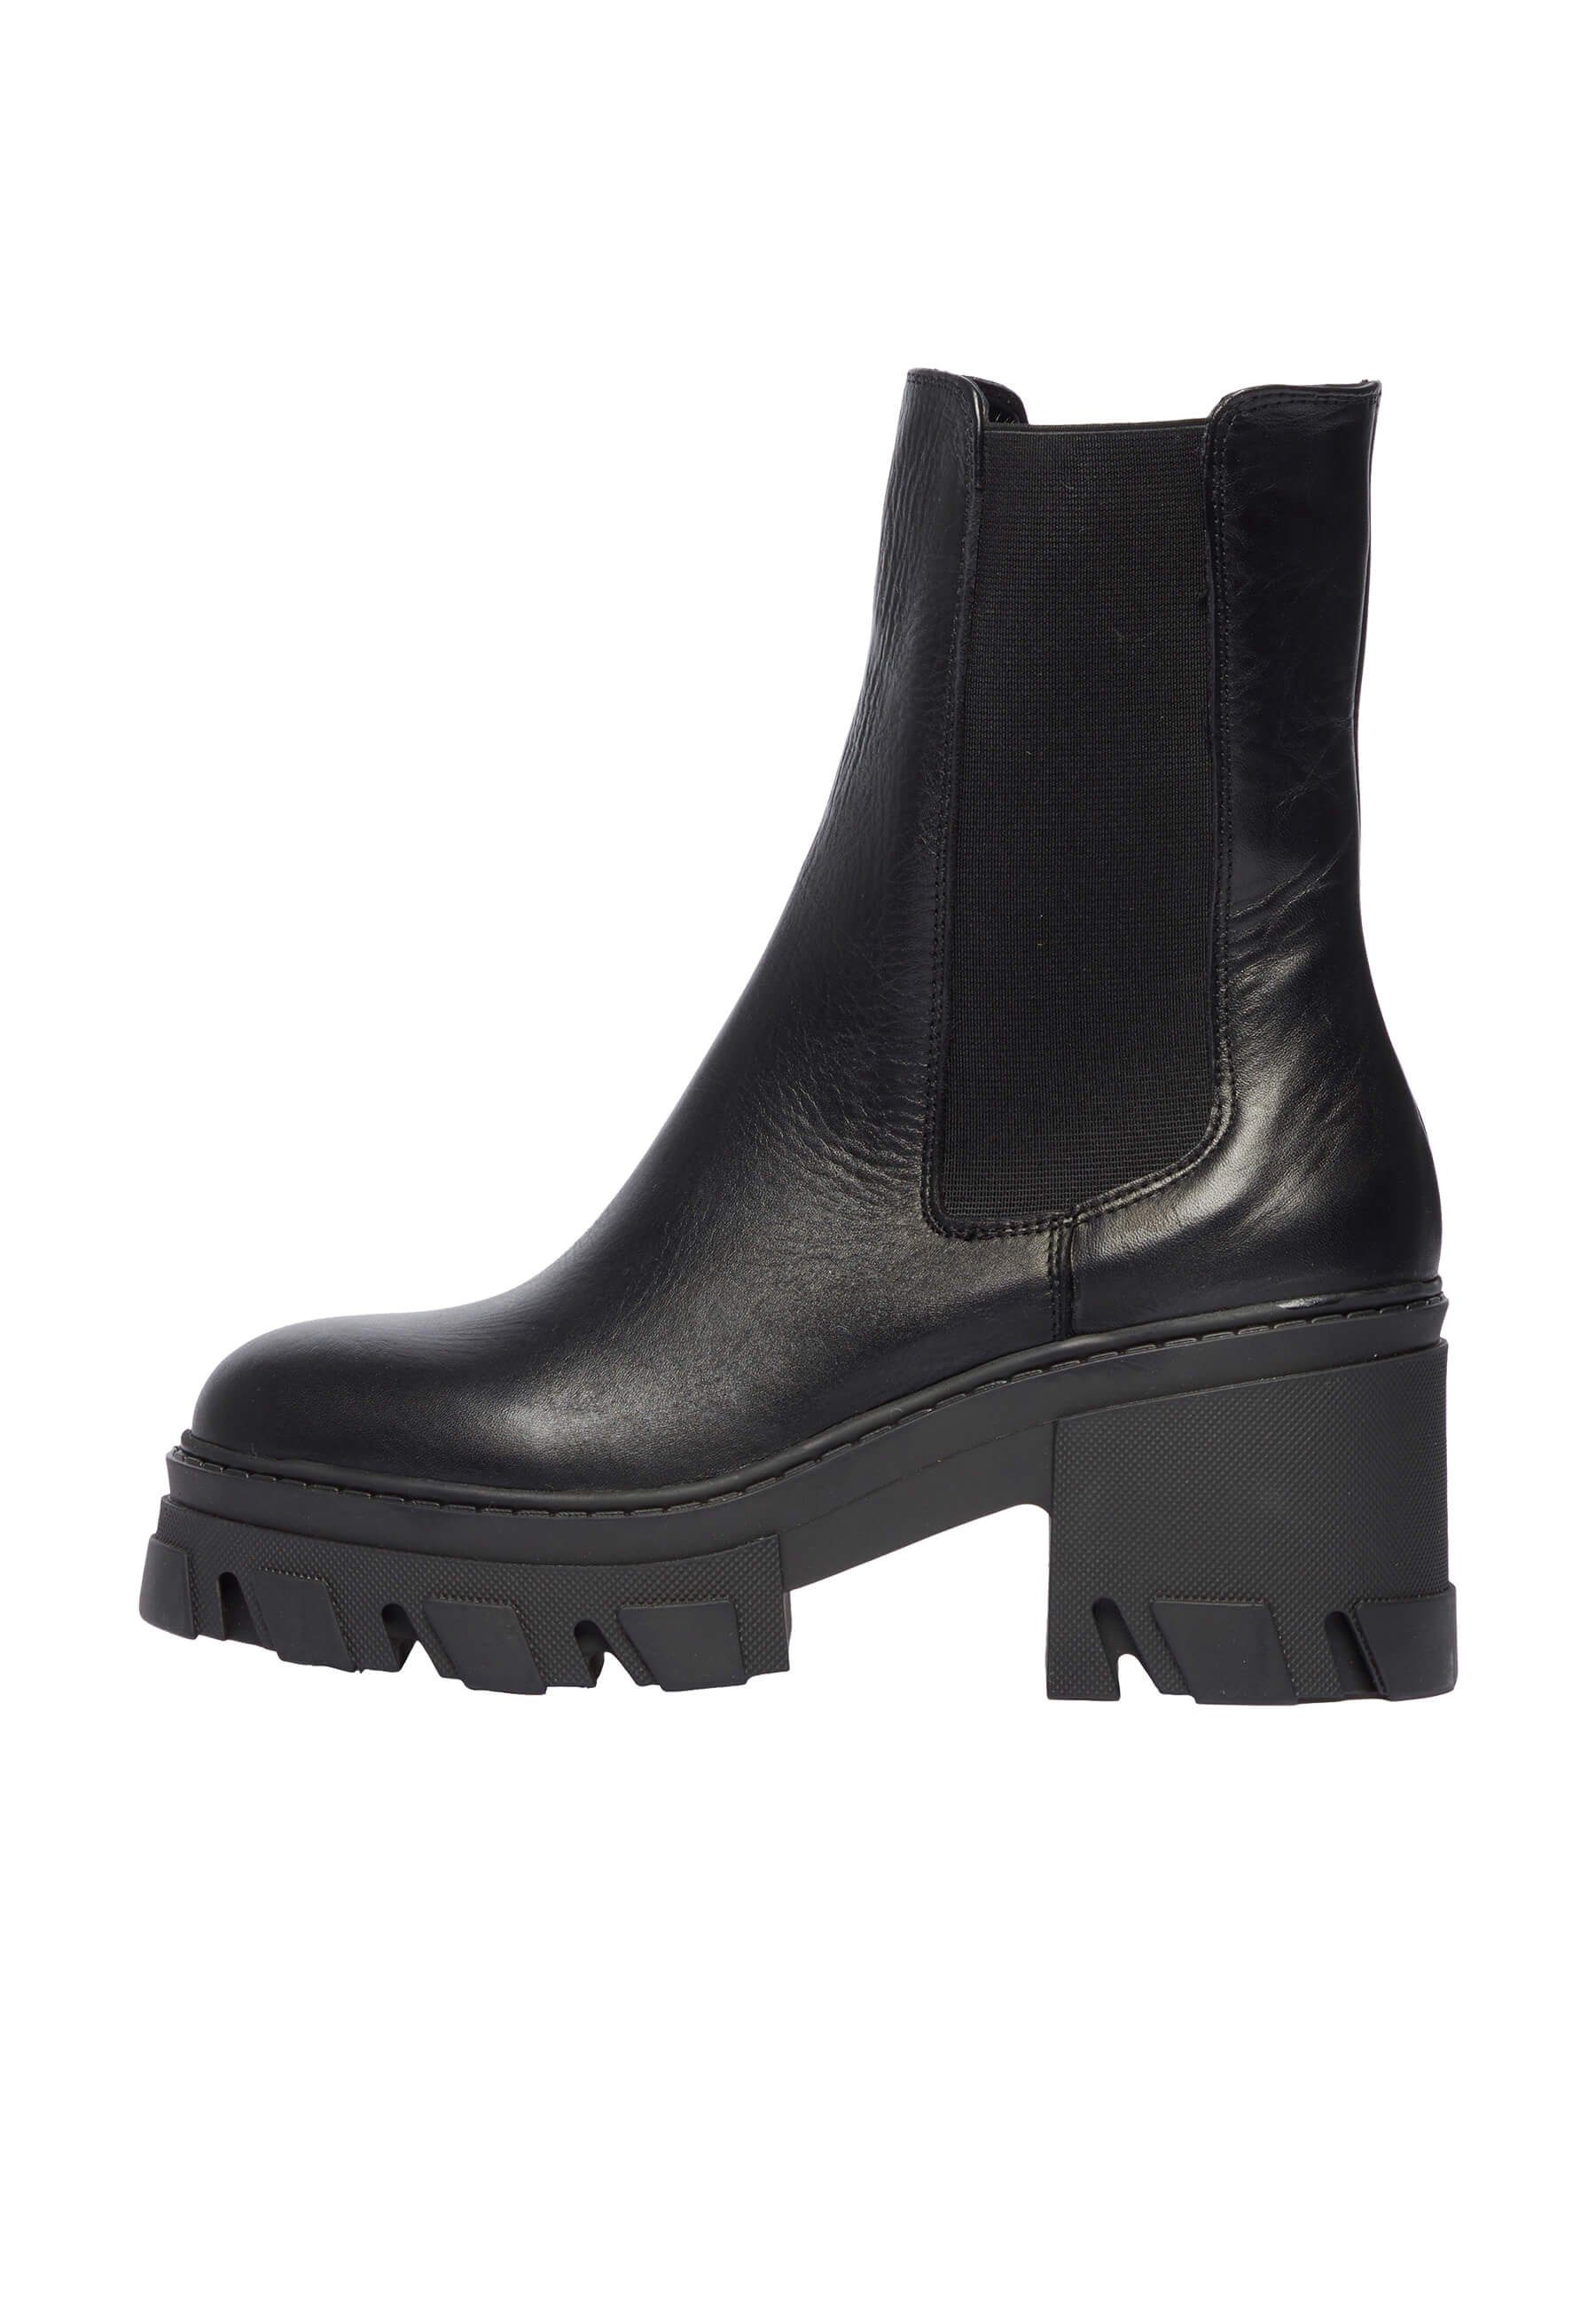 Di' nuovo Chelsea Boots Mit Grober Plateausohle Chelseaboots mit modernem Design | Chelsea-Boots